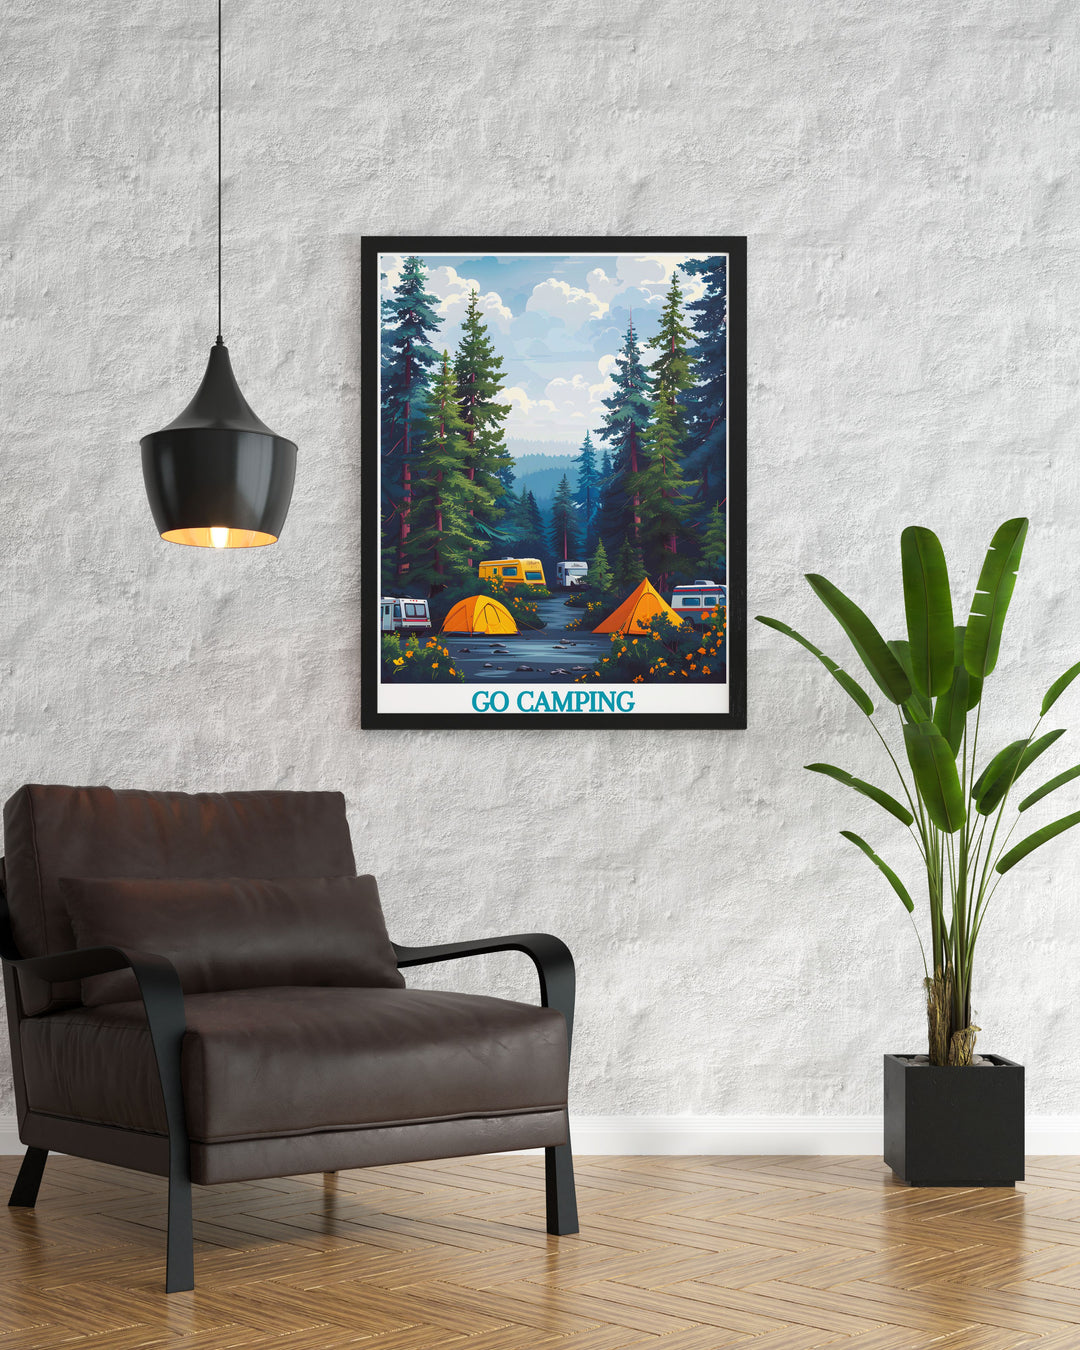 Vintage travel poster of a camper van in a forest, celebrating the charm of retro camping and the joy of exploring nature, perfect for adding a nostalgic touch to your decor.